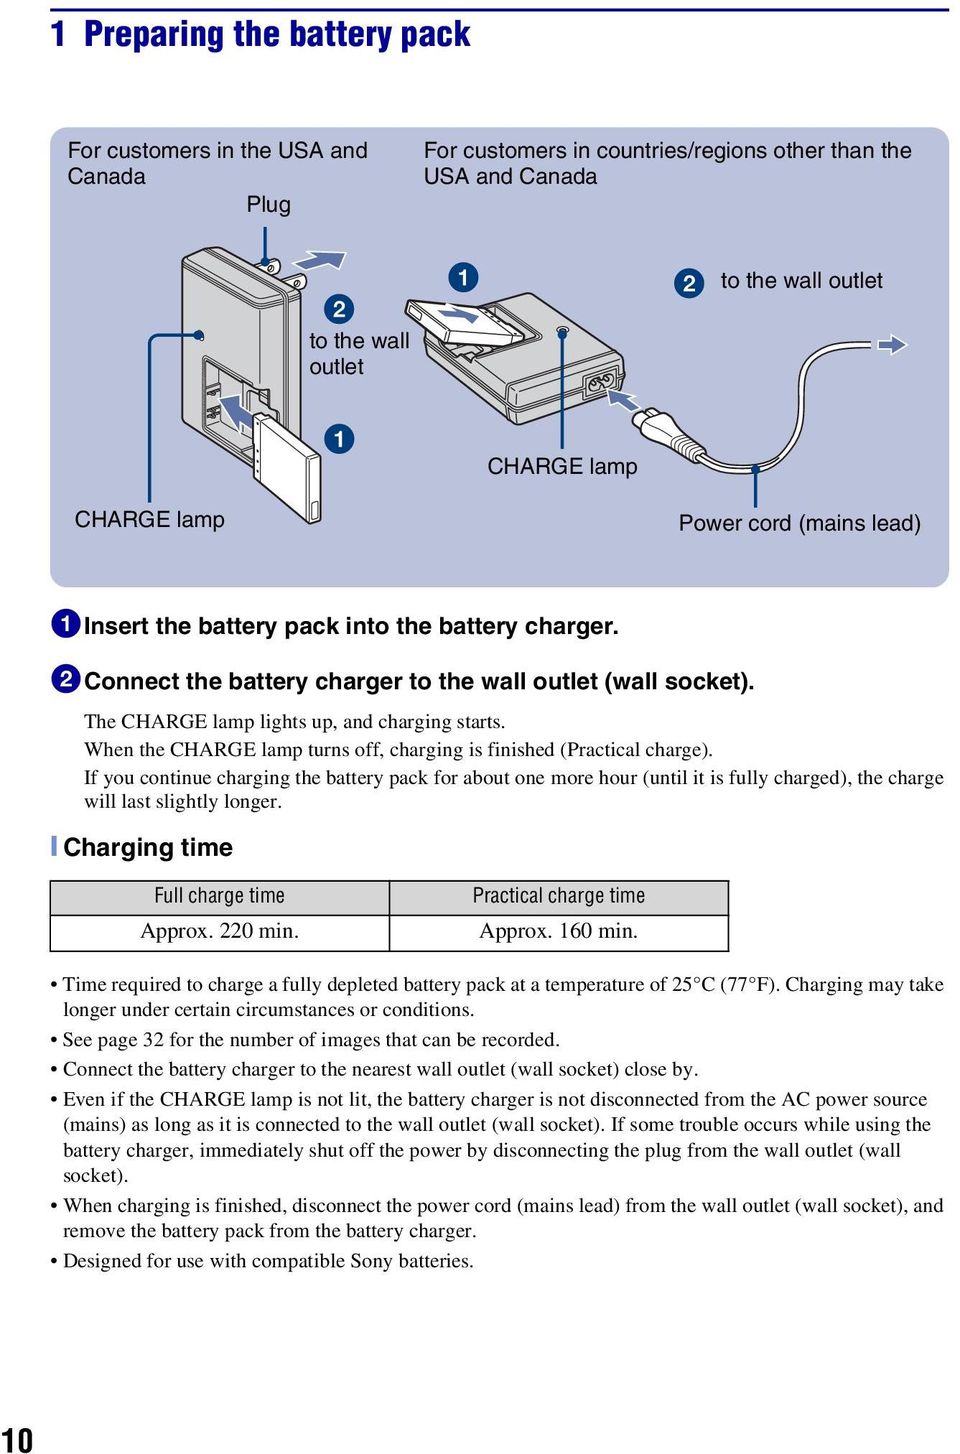 When the CHARGE lamp turns off, charging is finished (Practical charge).